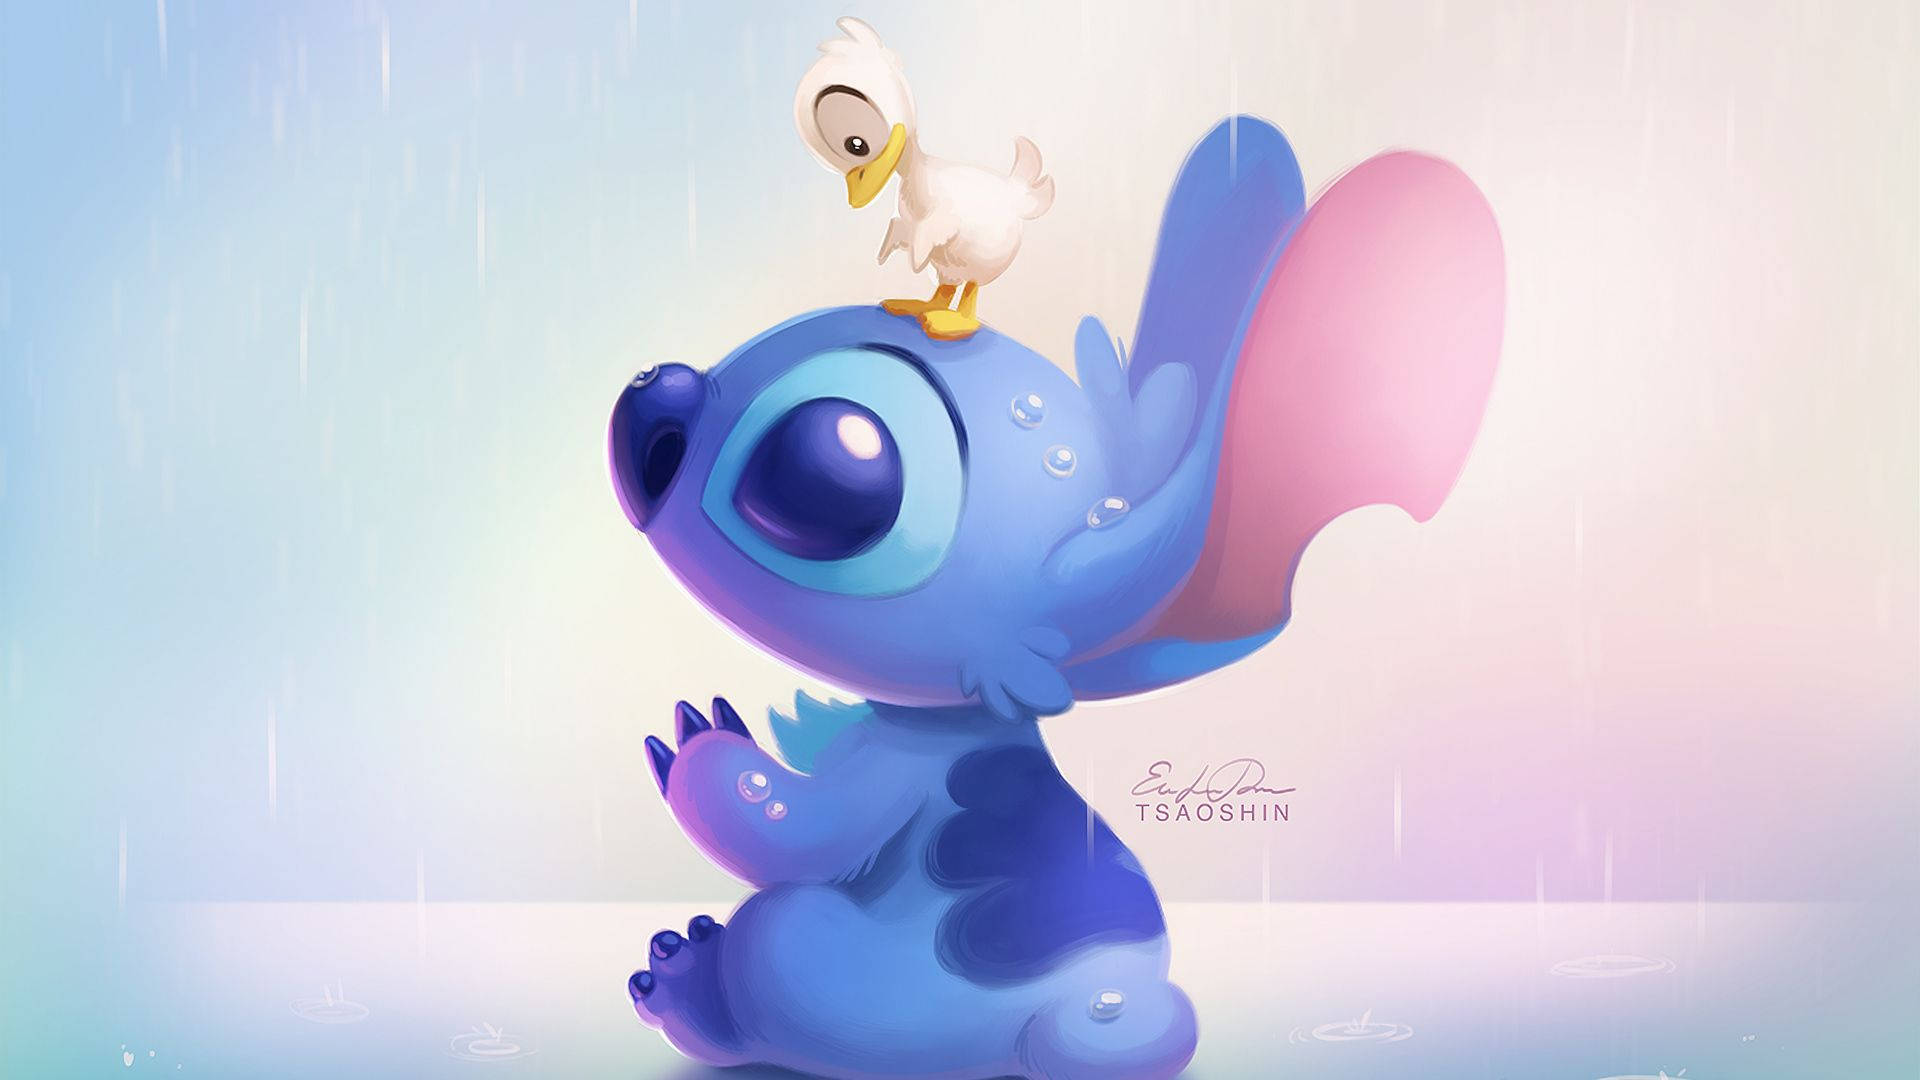 Stitch and a duckling on his head fan art wallpaper.